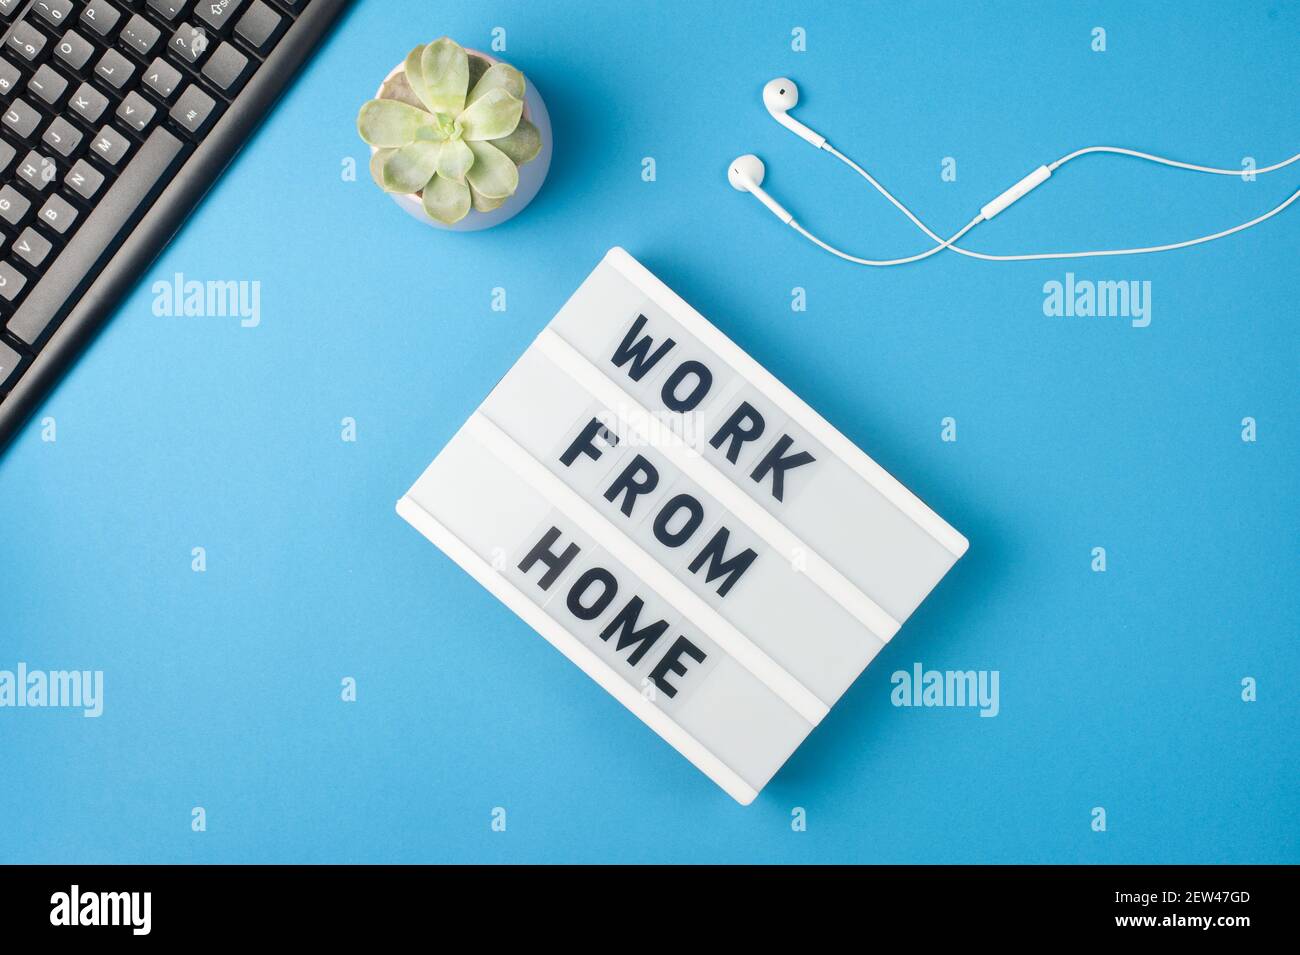 Work from home - text on display lightbox on blue background workplace. Black keyboard and white earphones. Freelance work concept Stock Photo